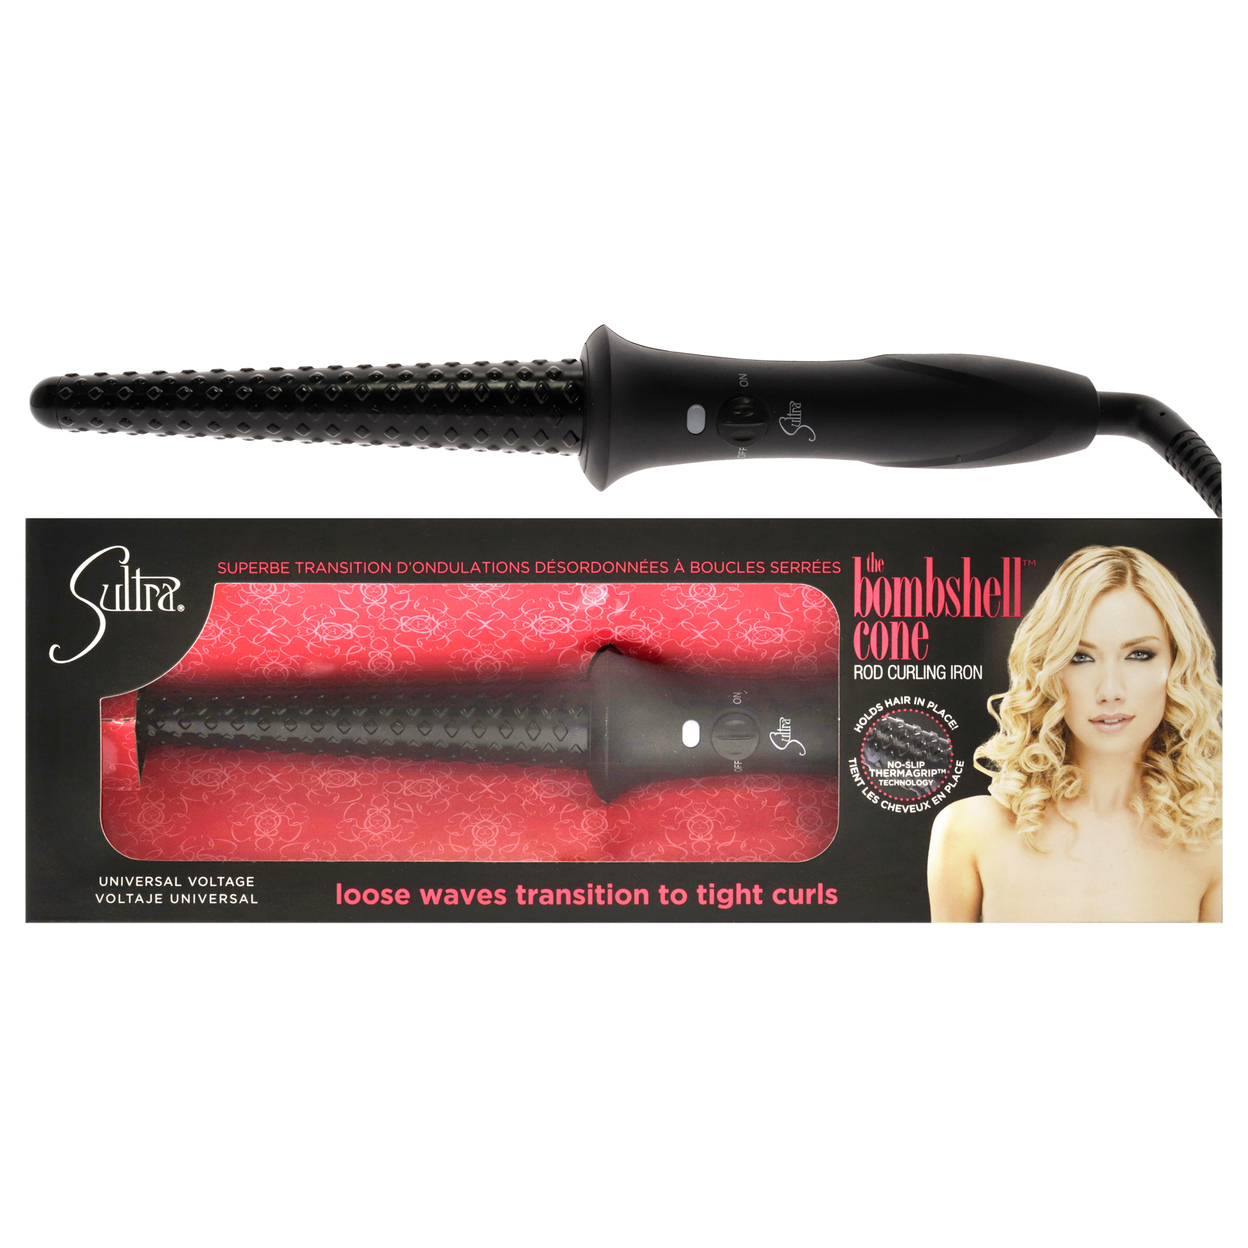 Sultra The Bombshell Cone Rod Curling Iron - Black 1 Inch